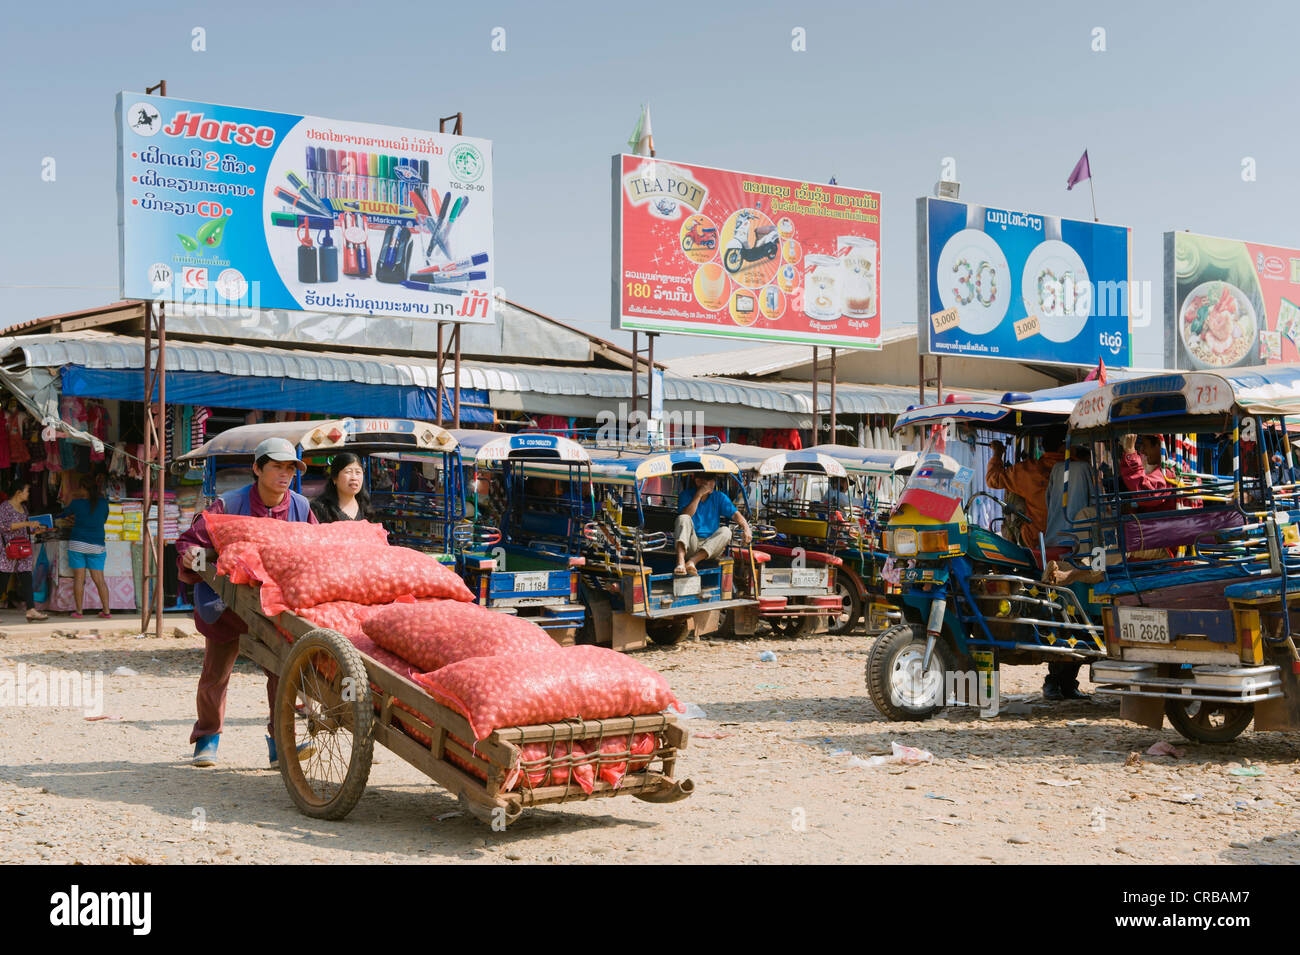 Traders at the Talat That Luang Market, Vientiane, Laos, Indochina, Asia Stock Photo